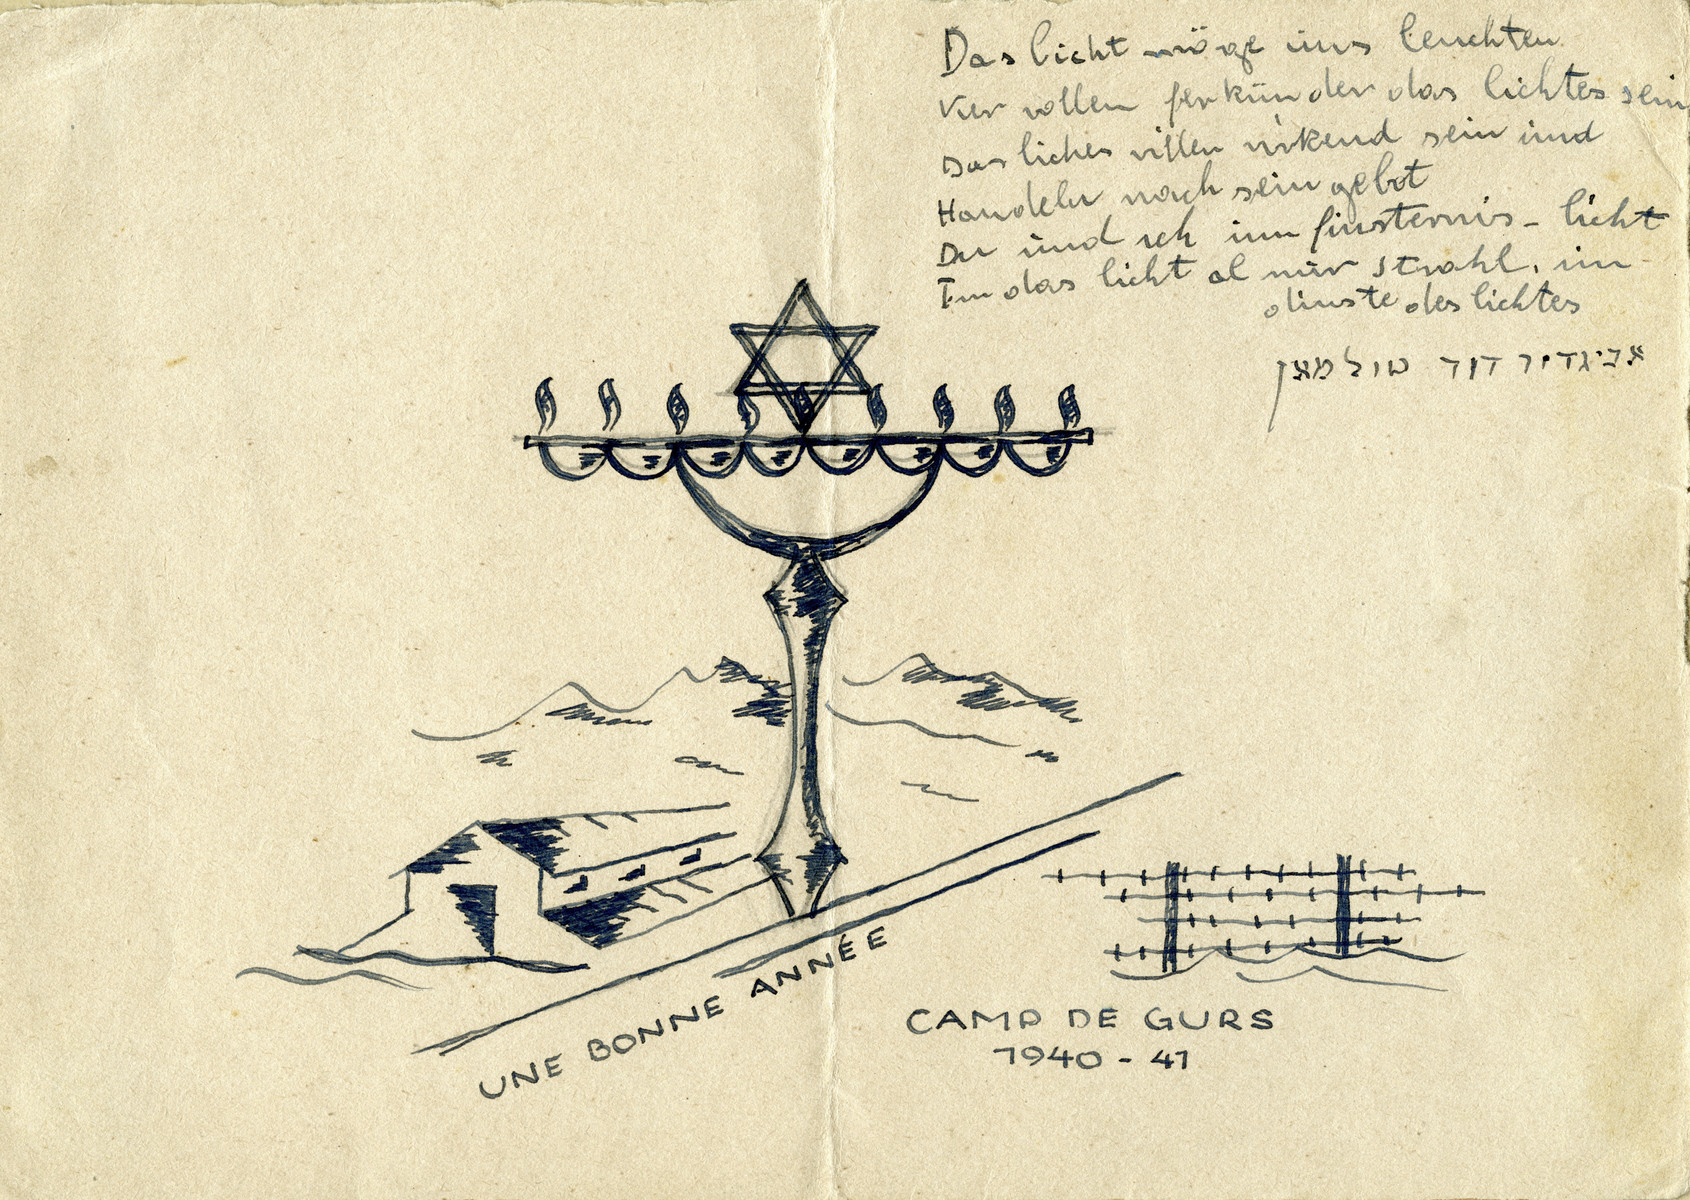 Engagement notice sent by Victor Tulman and Hella Bacmeister, internees in Gurs.

The menorah symbolizes their desire to bring light to the earth.